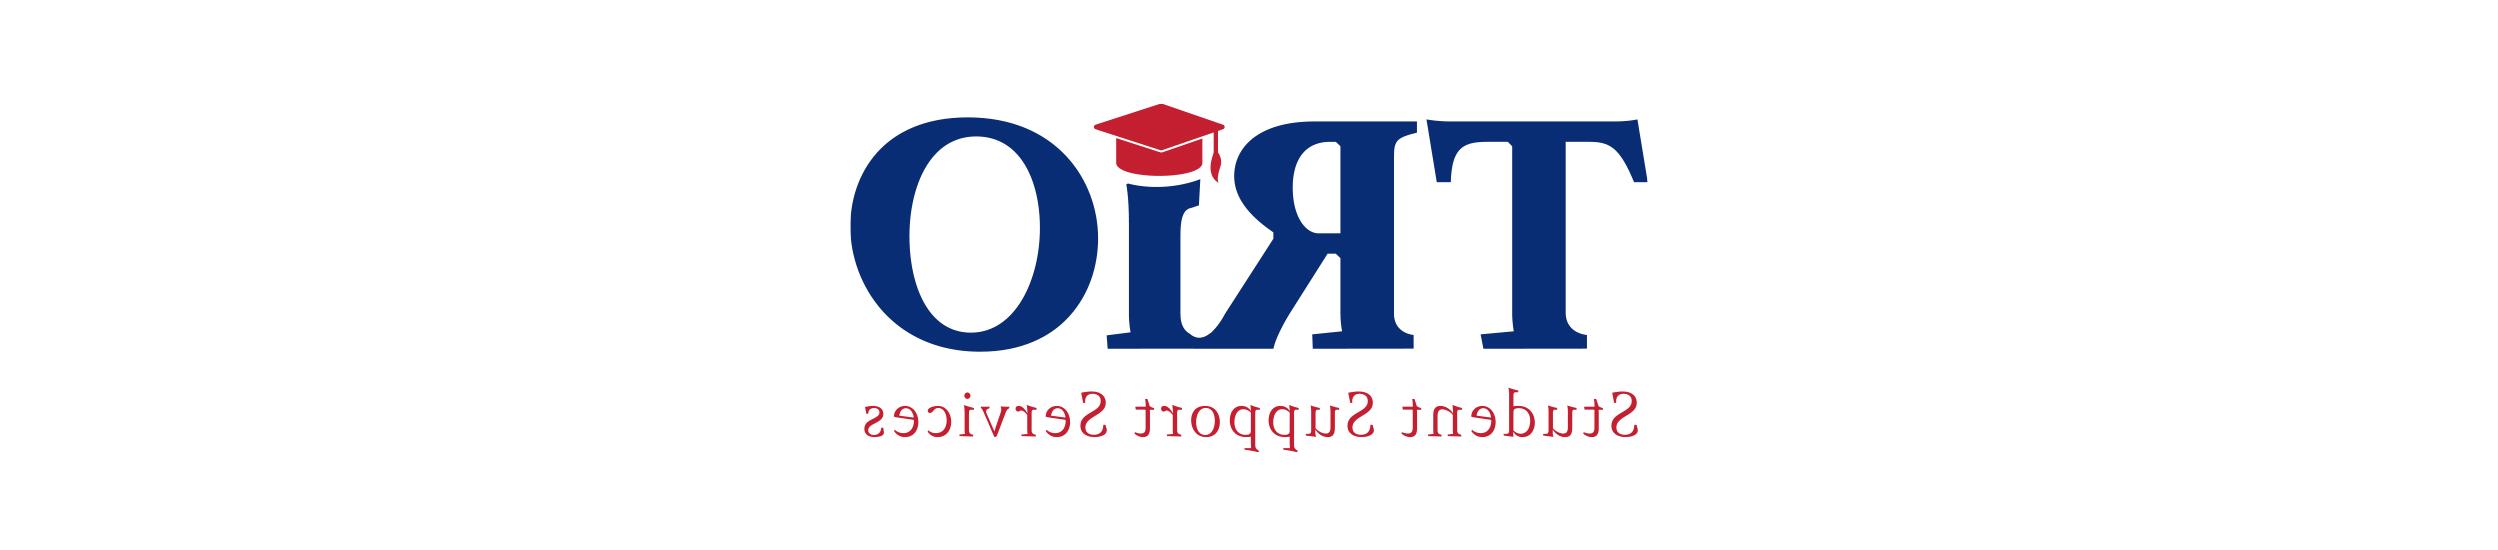 TRIO student support services logo